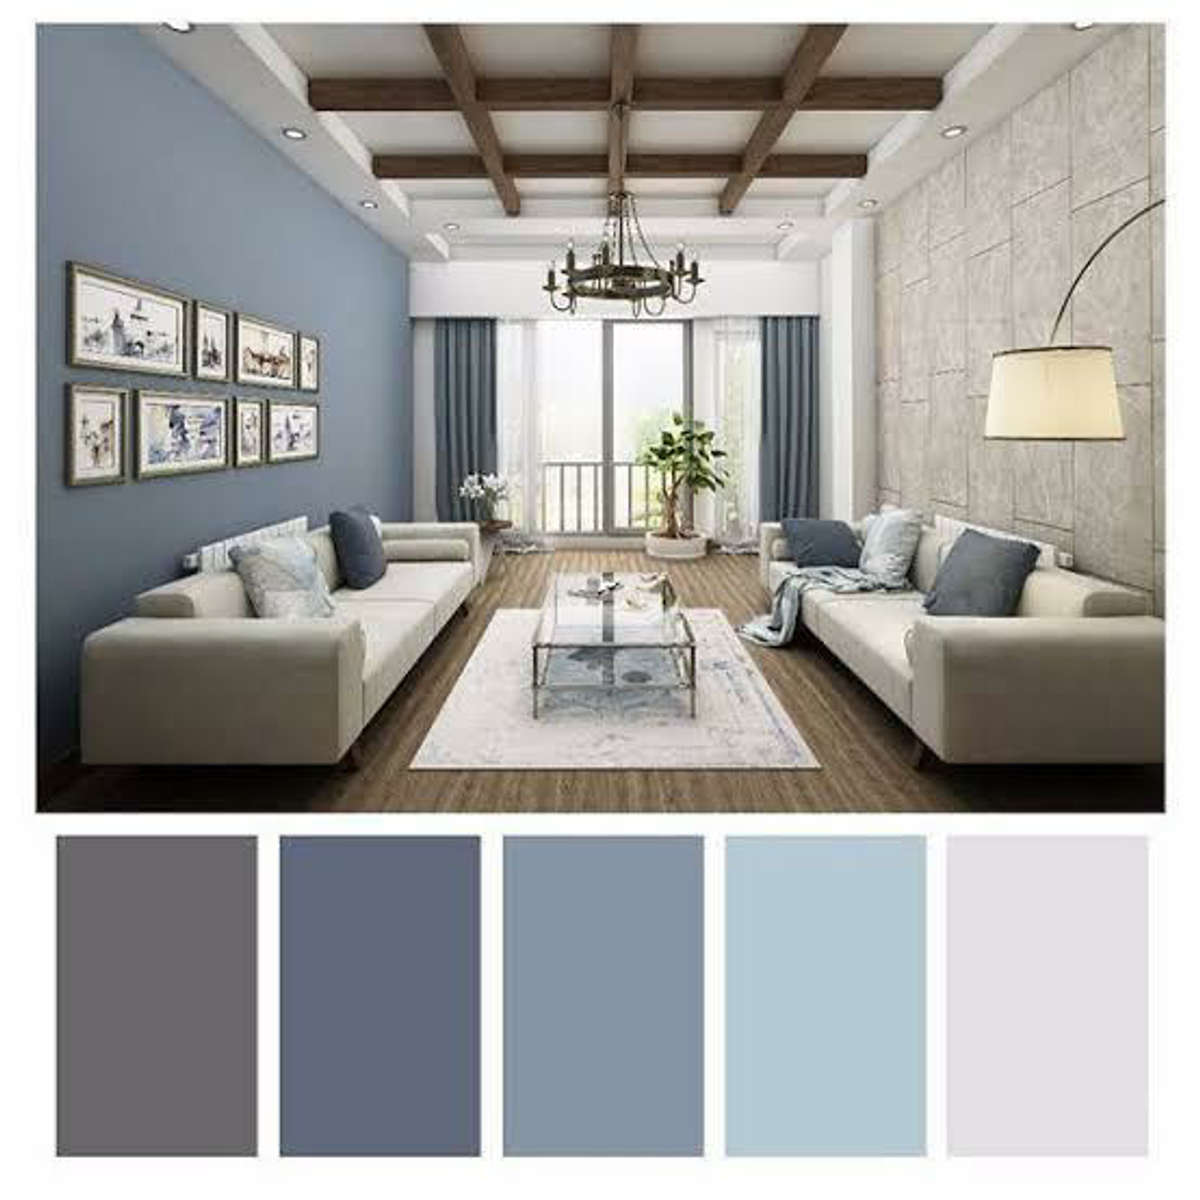 What colour for rooms - series 

1 -Living room
Green
Grey
Blue
white
Beige
